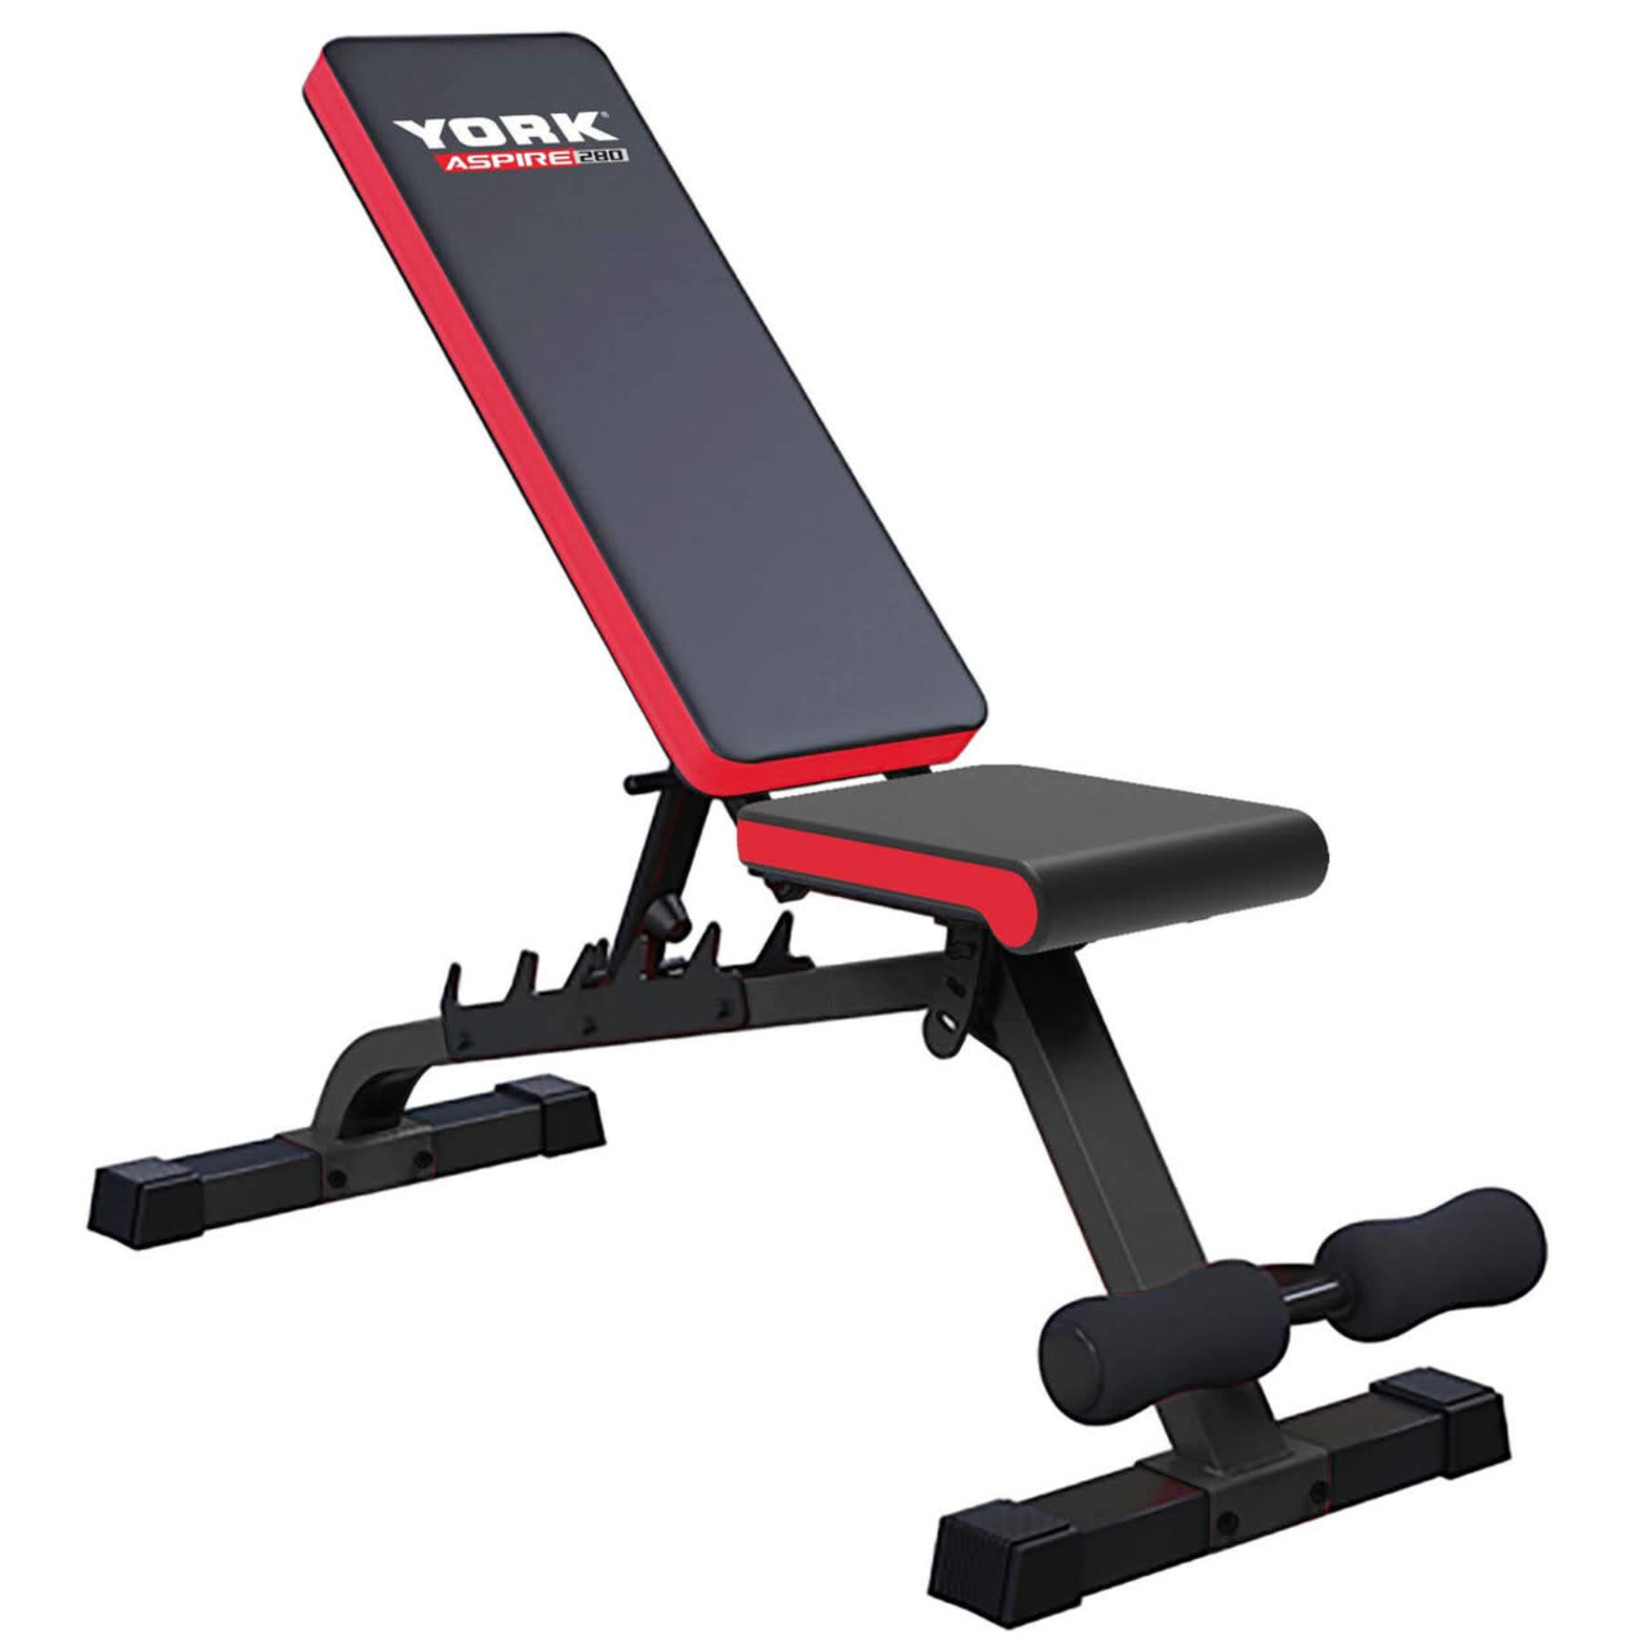 York York Aspire 280 Bench with Foot Hold Down